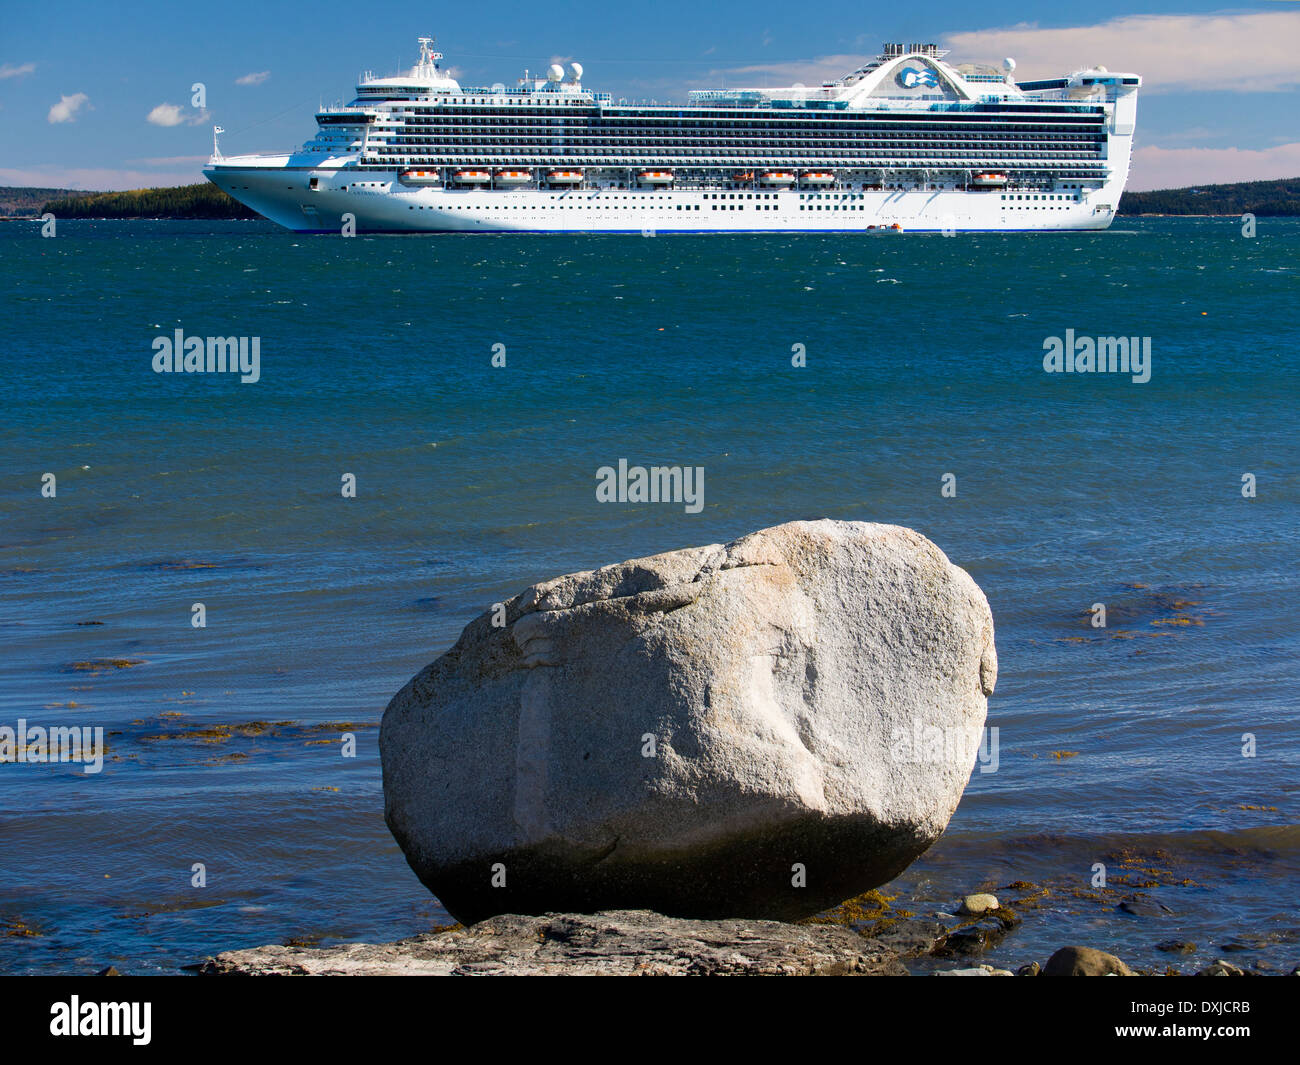 Cruise Liner Caribbean Princess moored off Bar Harbour Maine USA 4 Stock Photo